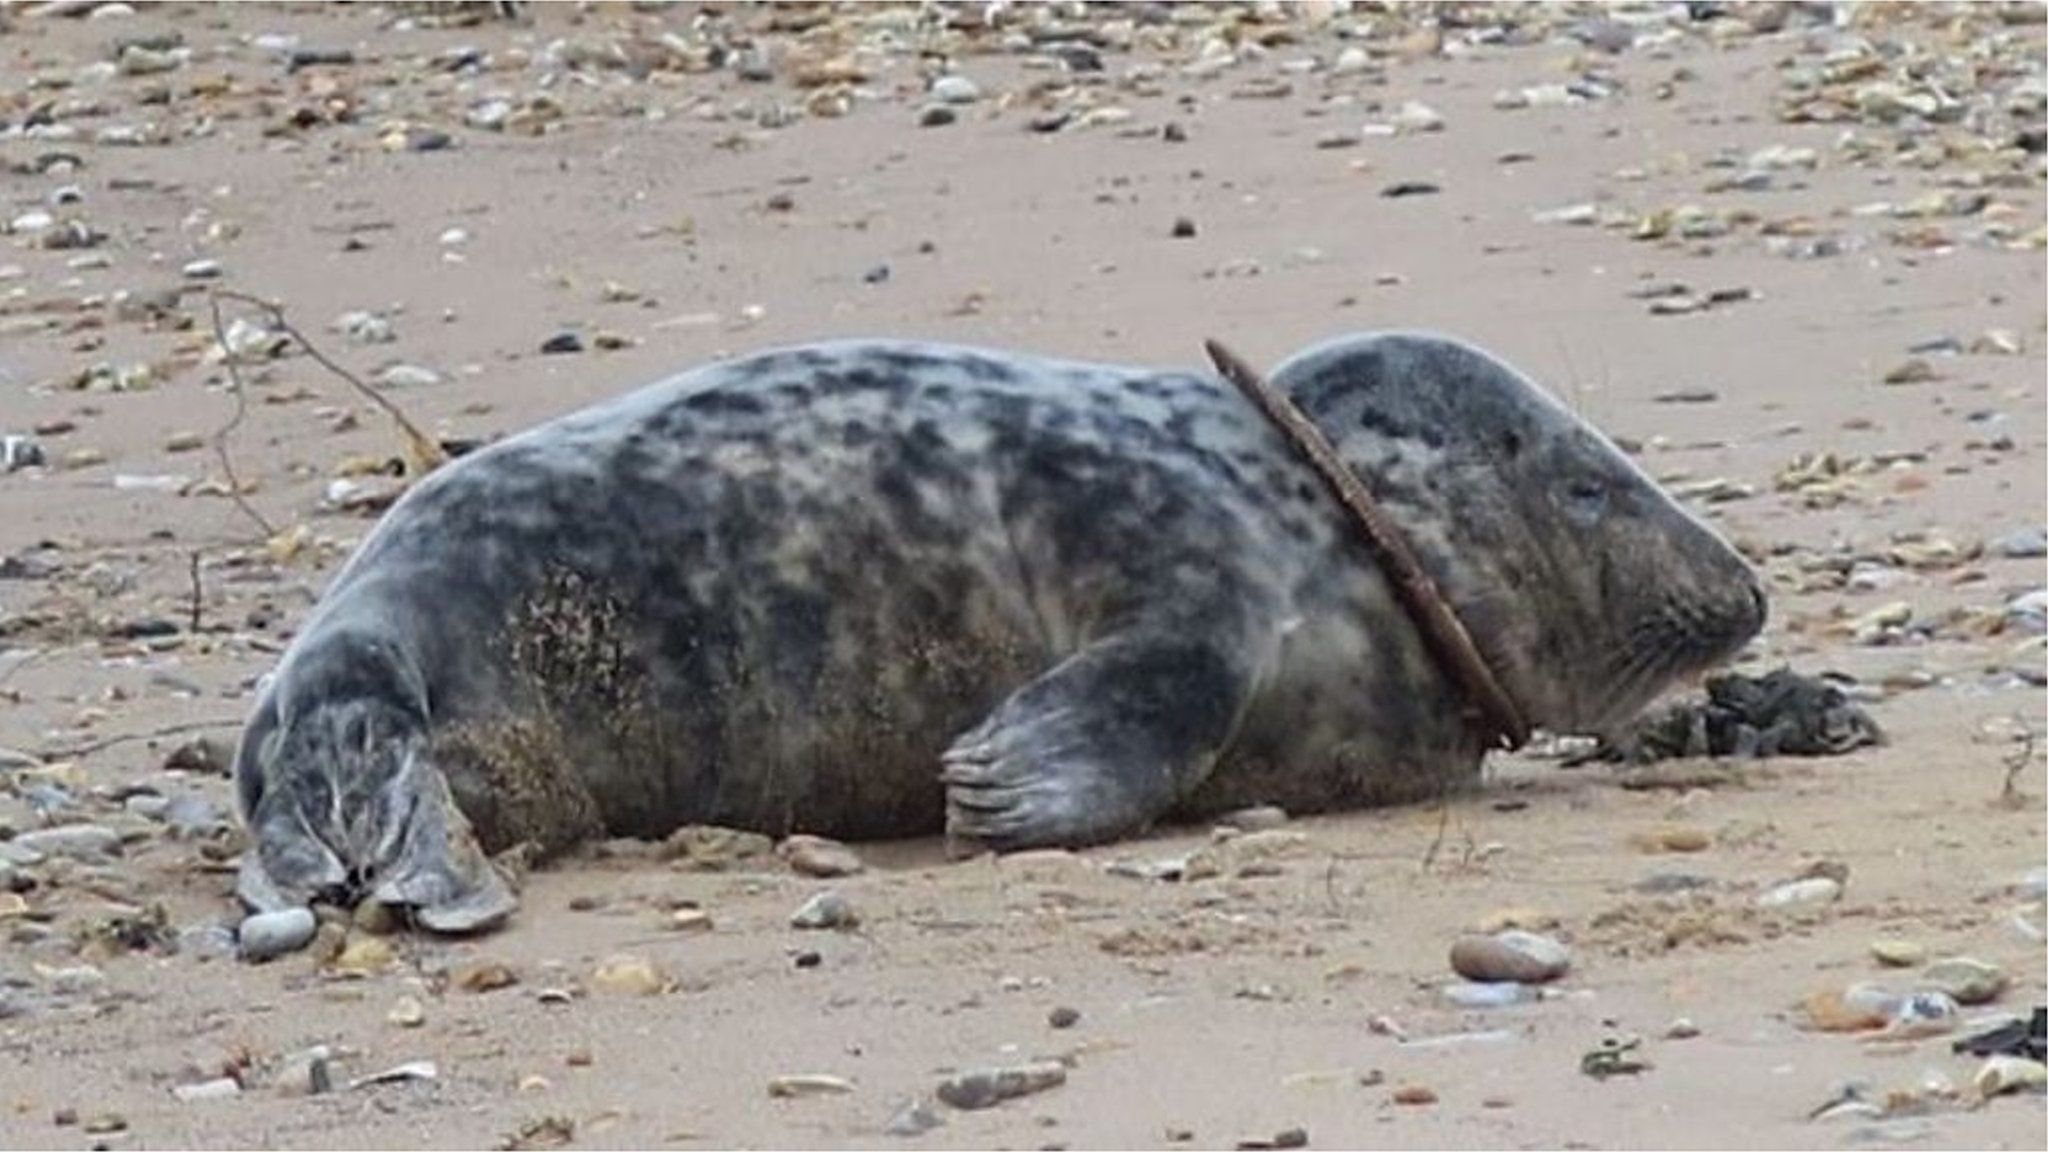 The seal named Relashio was close to death when he was rescued in May.